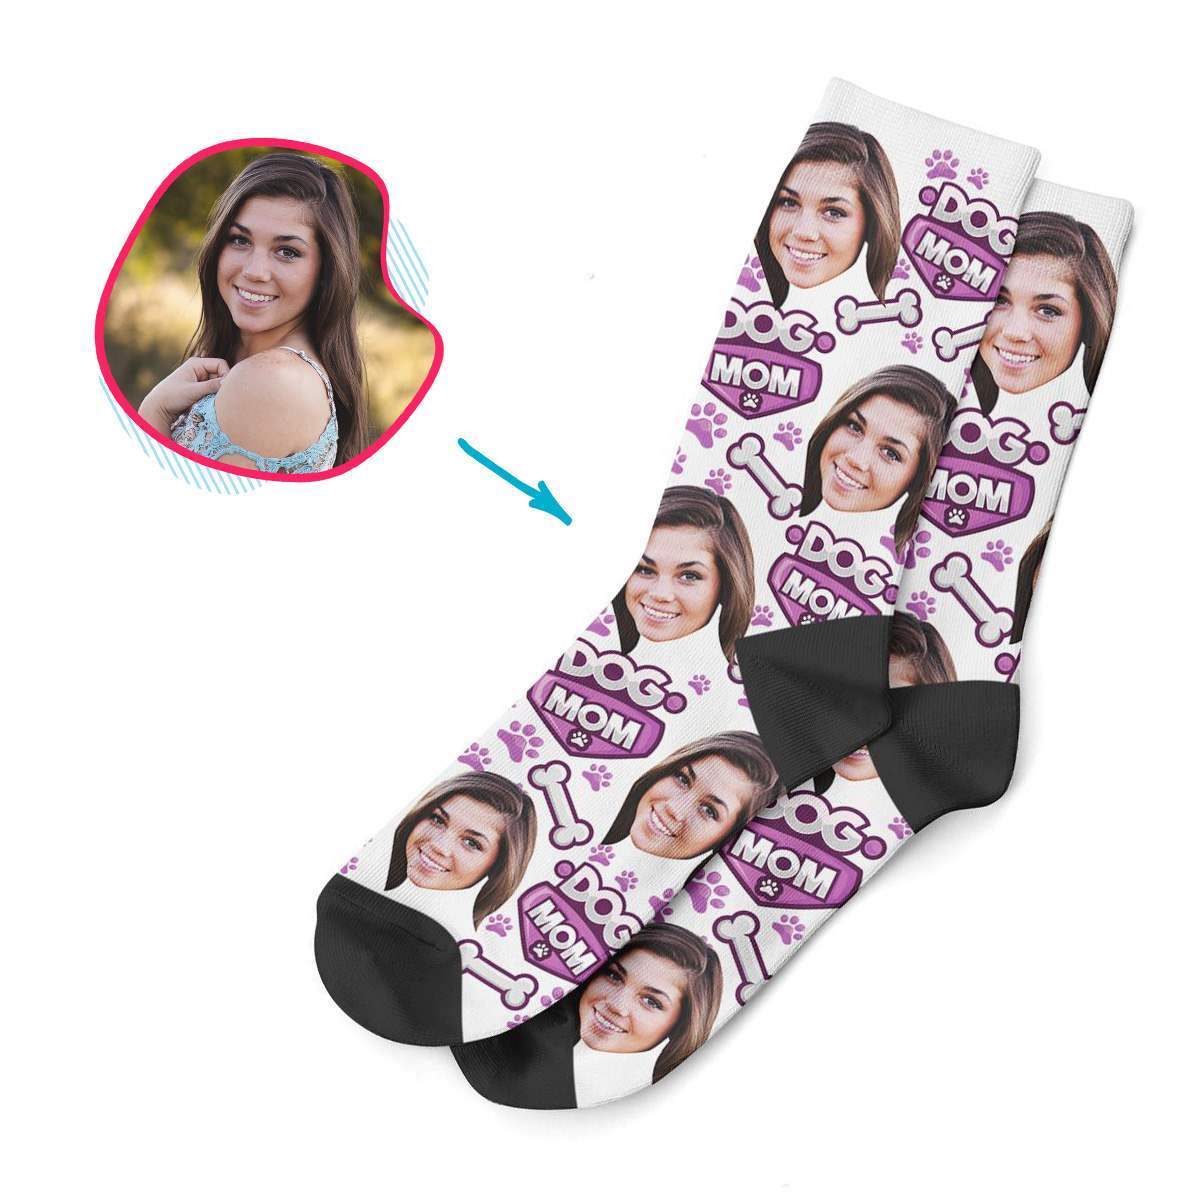 white Dog Mom socks personalized with photo of face printed on them